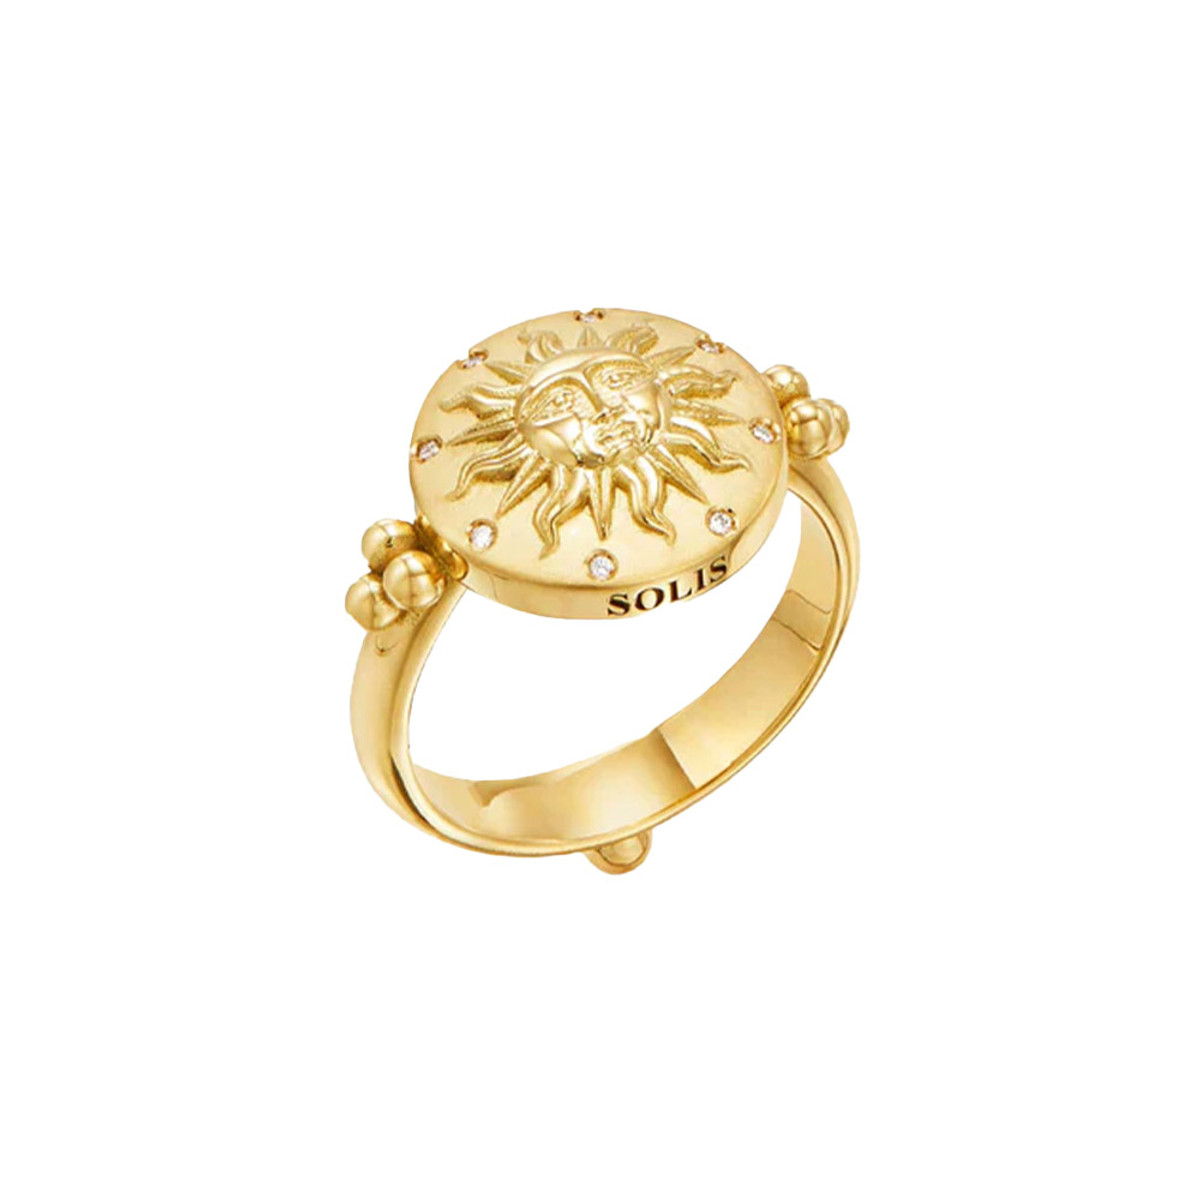 Temple St. Clair 18K Yellow Gold Sole Ring-35159 Product Image